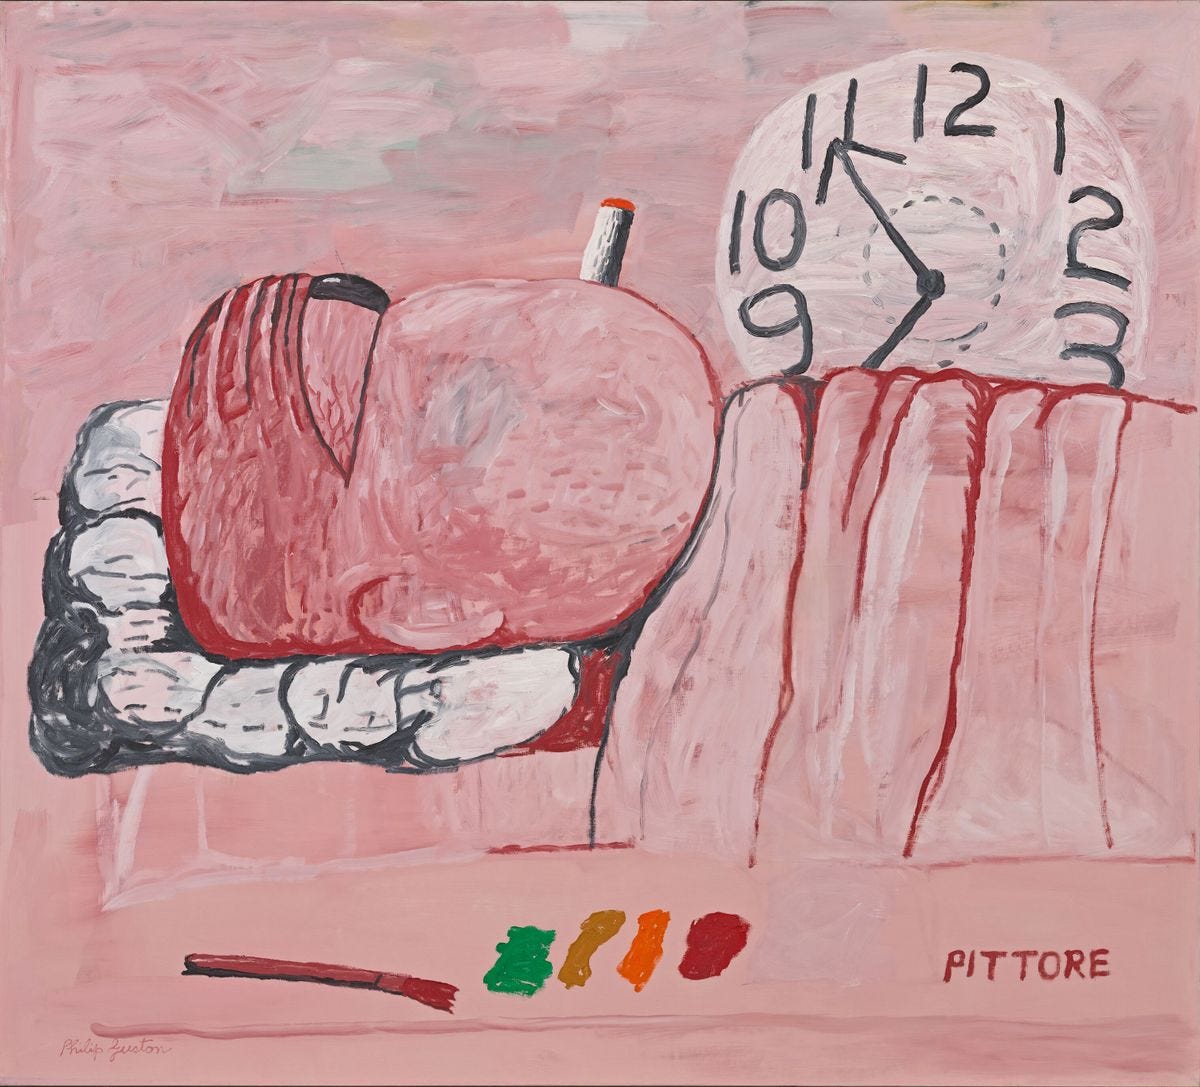 Pittore, 1973 by Philip Guston | Ocula